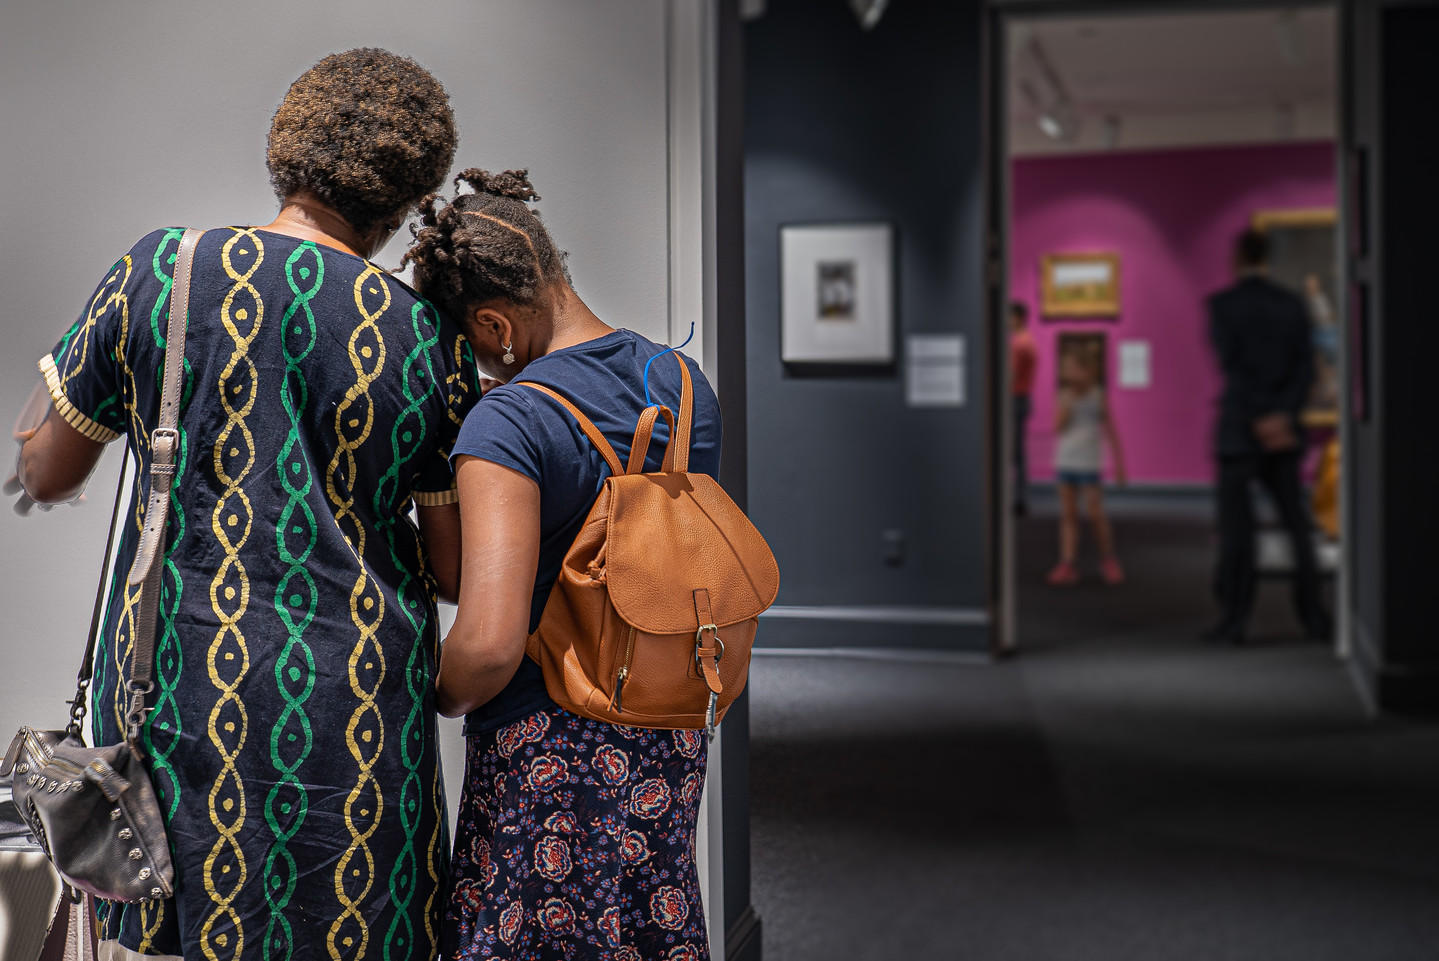 A middle aged, medium dark-skinned woman and a school age medium dark skinned girl face away from the camera and lean into each other affectionately while viewing artwork.